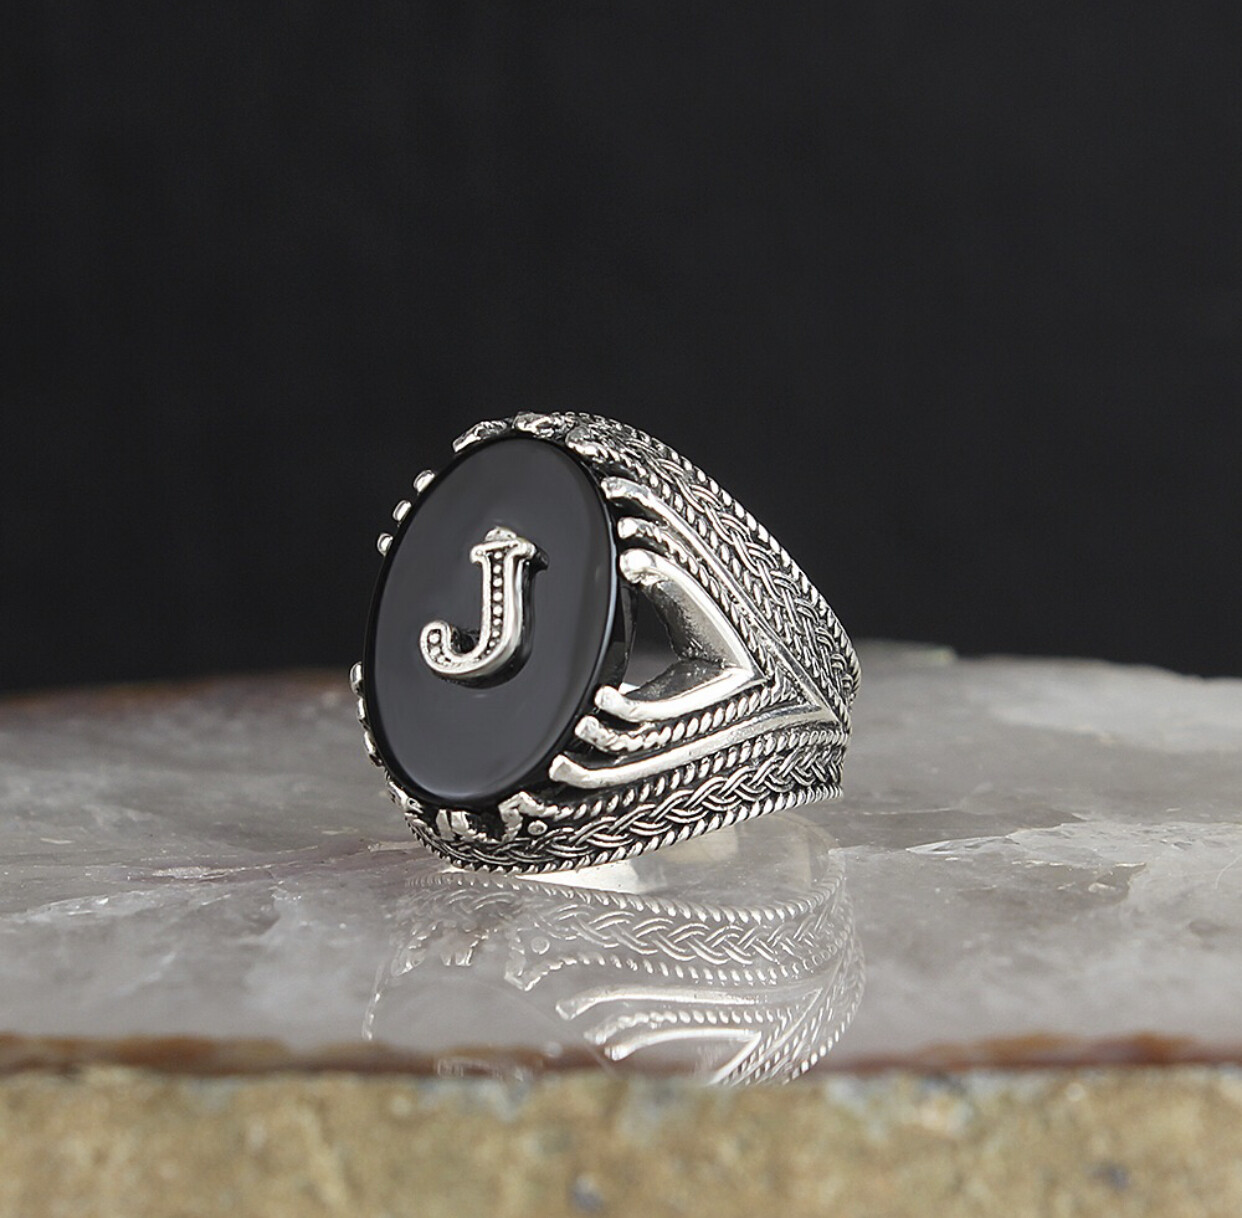 Put your own Letter on 925 Silver Sterling Ring with Onyx Stone